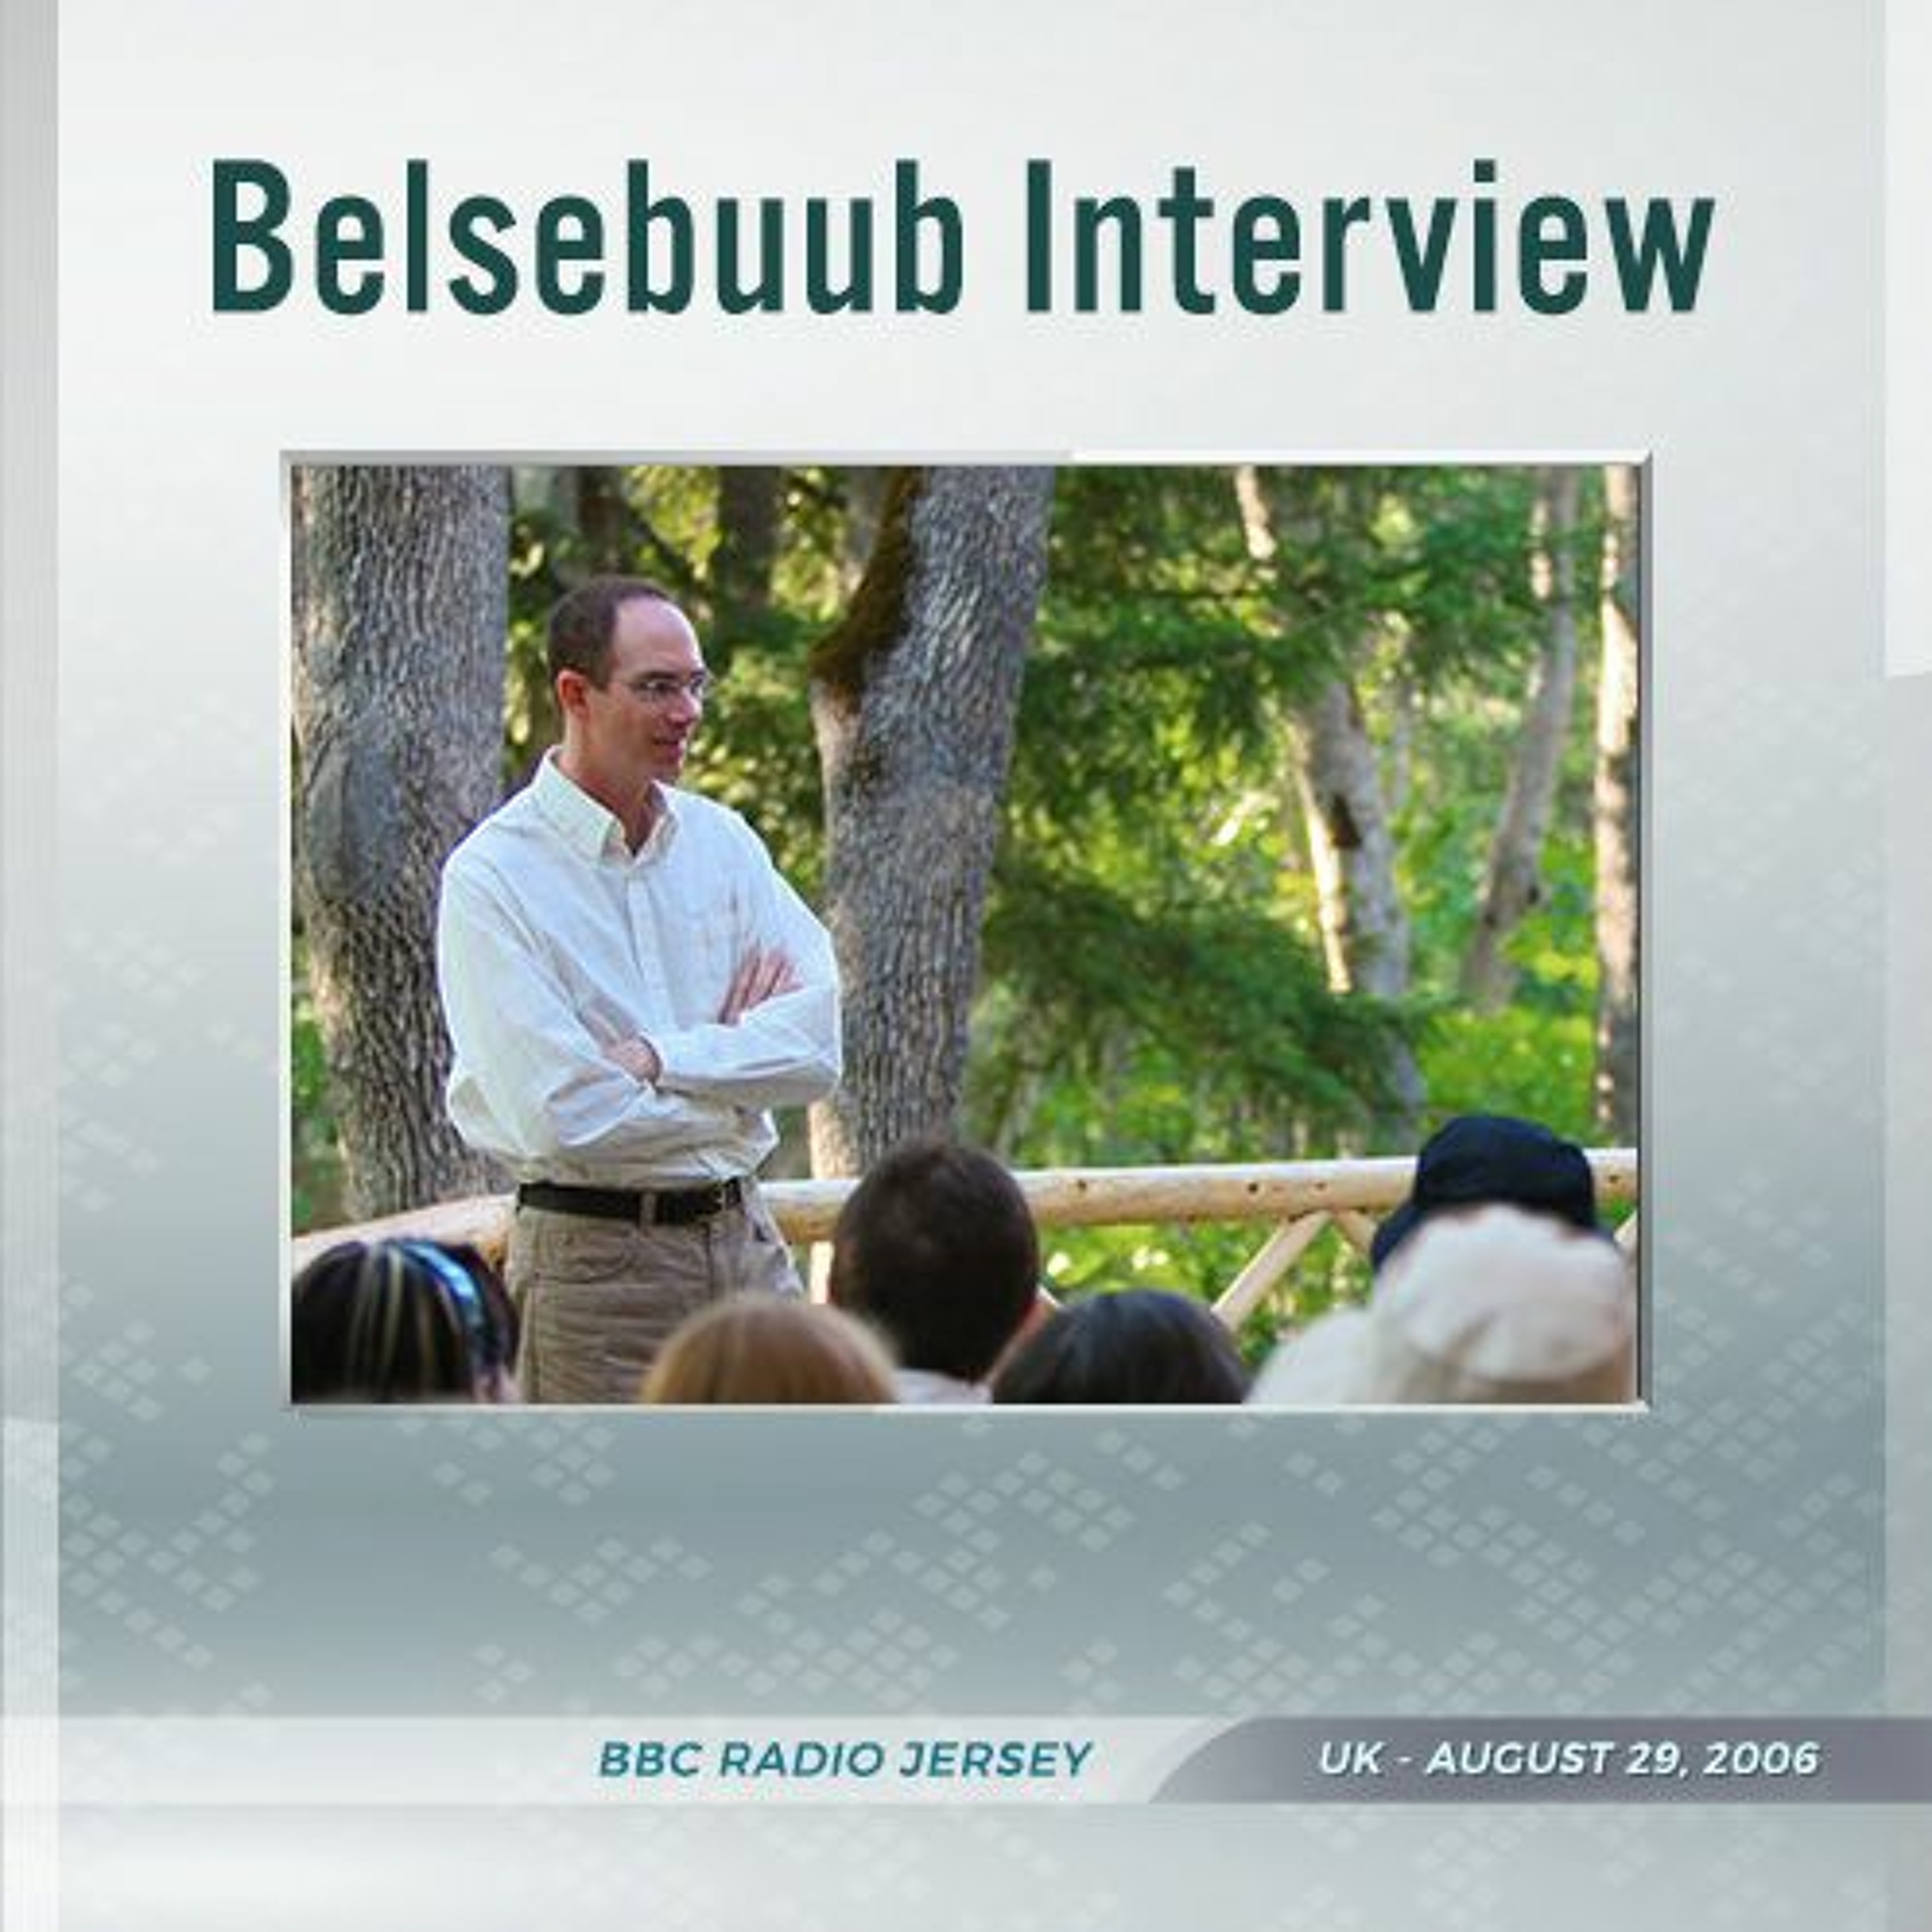 Belsebuub on BBC Radio Jersey: The Meaning of Dreams